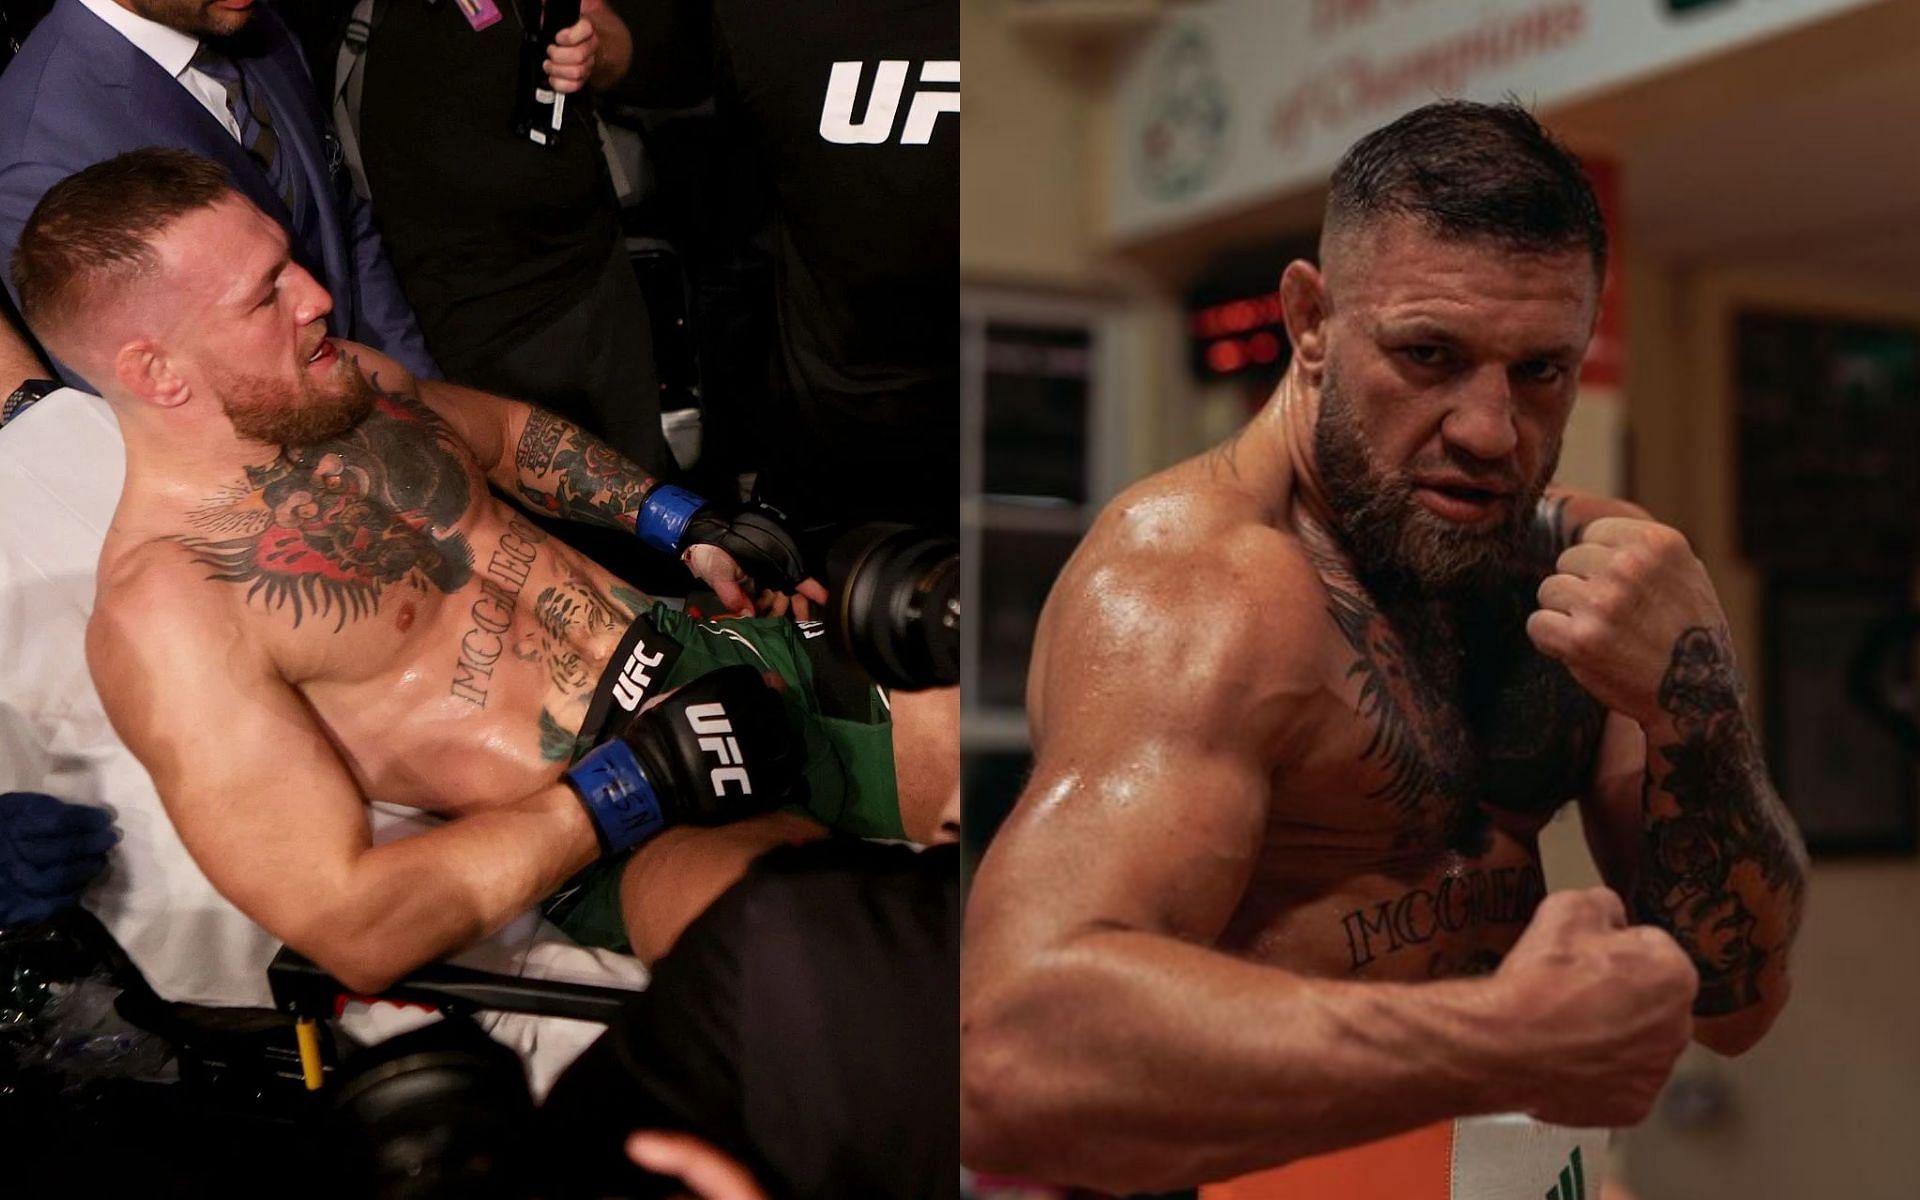 McGregor injured (left), McGregor in training (right) [Images courtesy of @thenotoriousmma on Instagram]